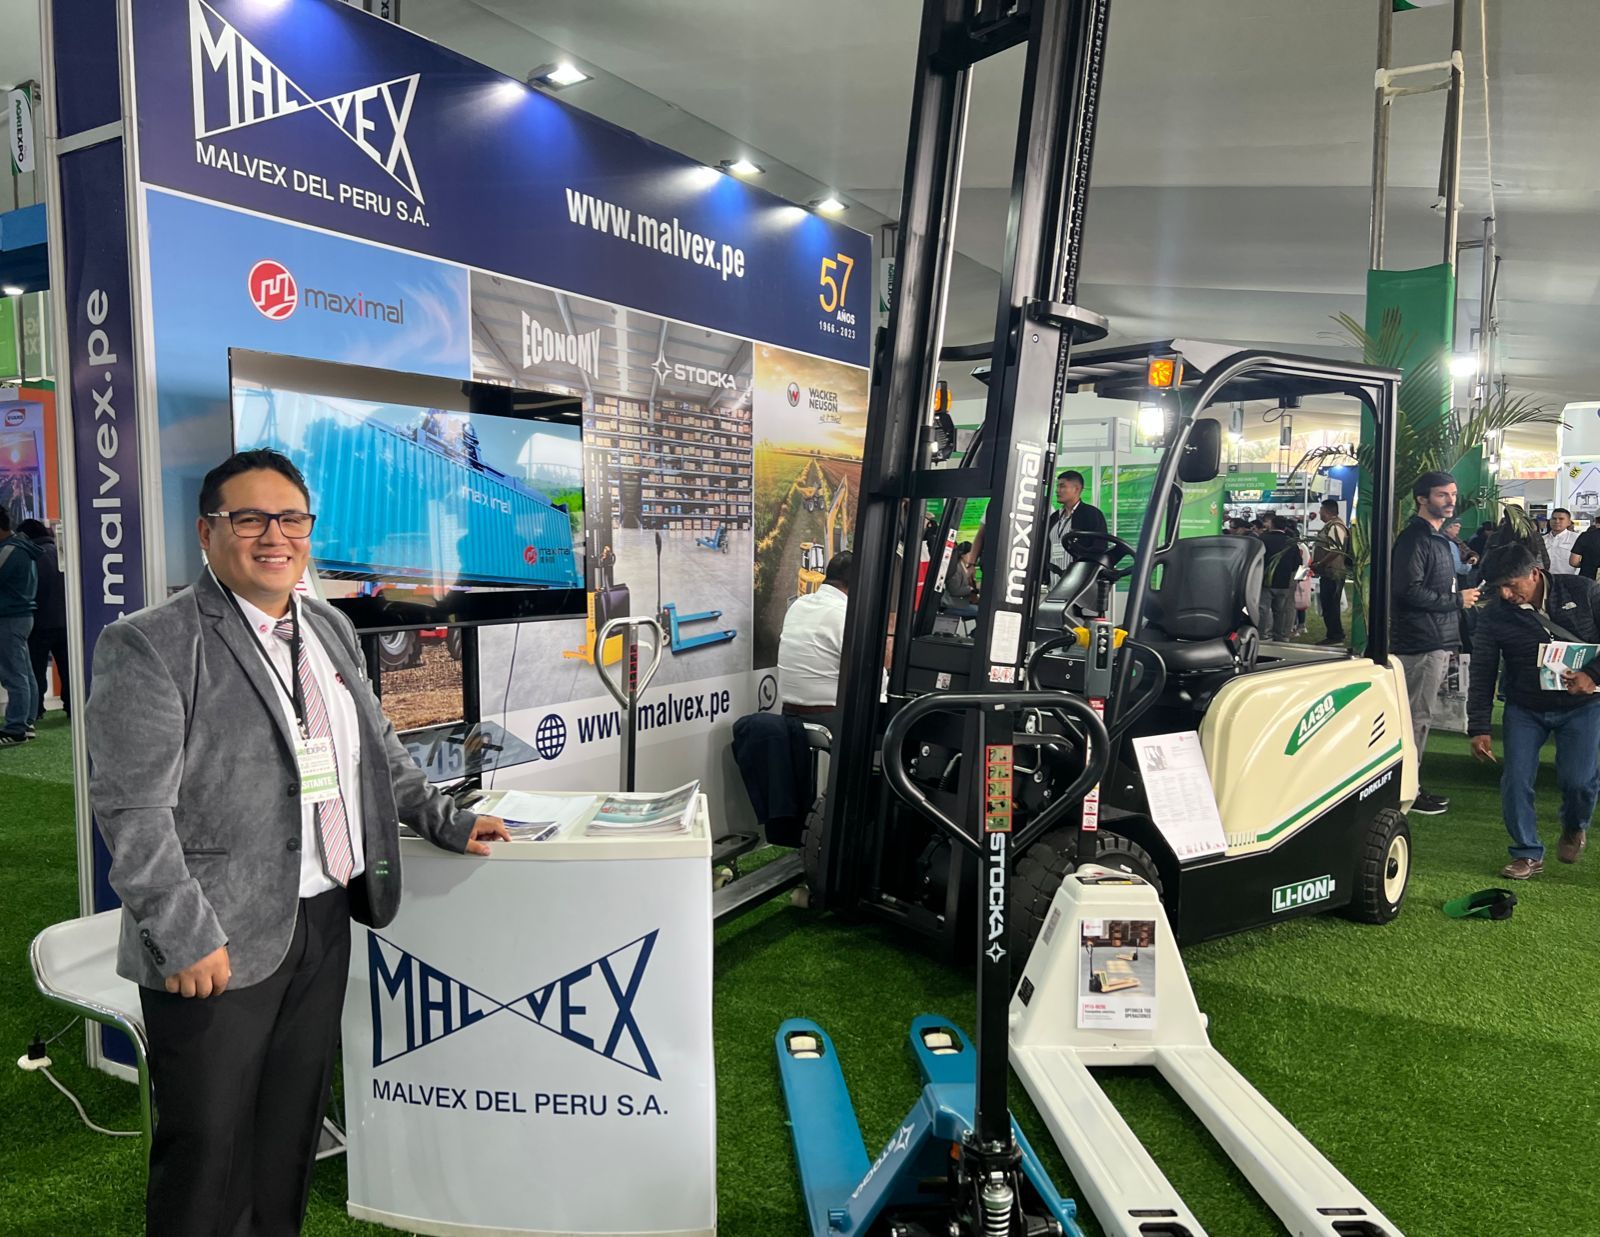 Maxiaml Dealer Update: Attended The Agri Expo in Peru